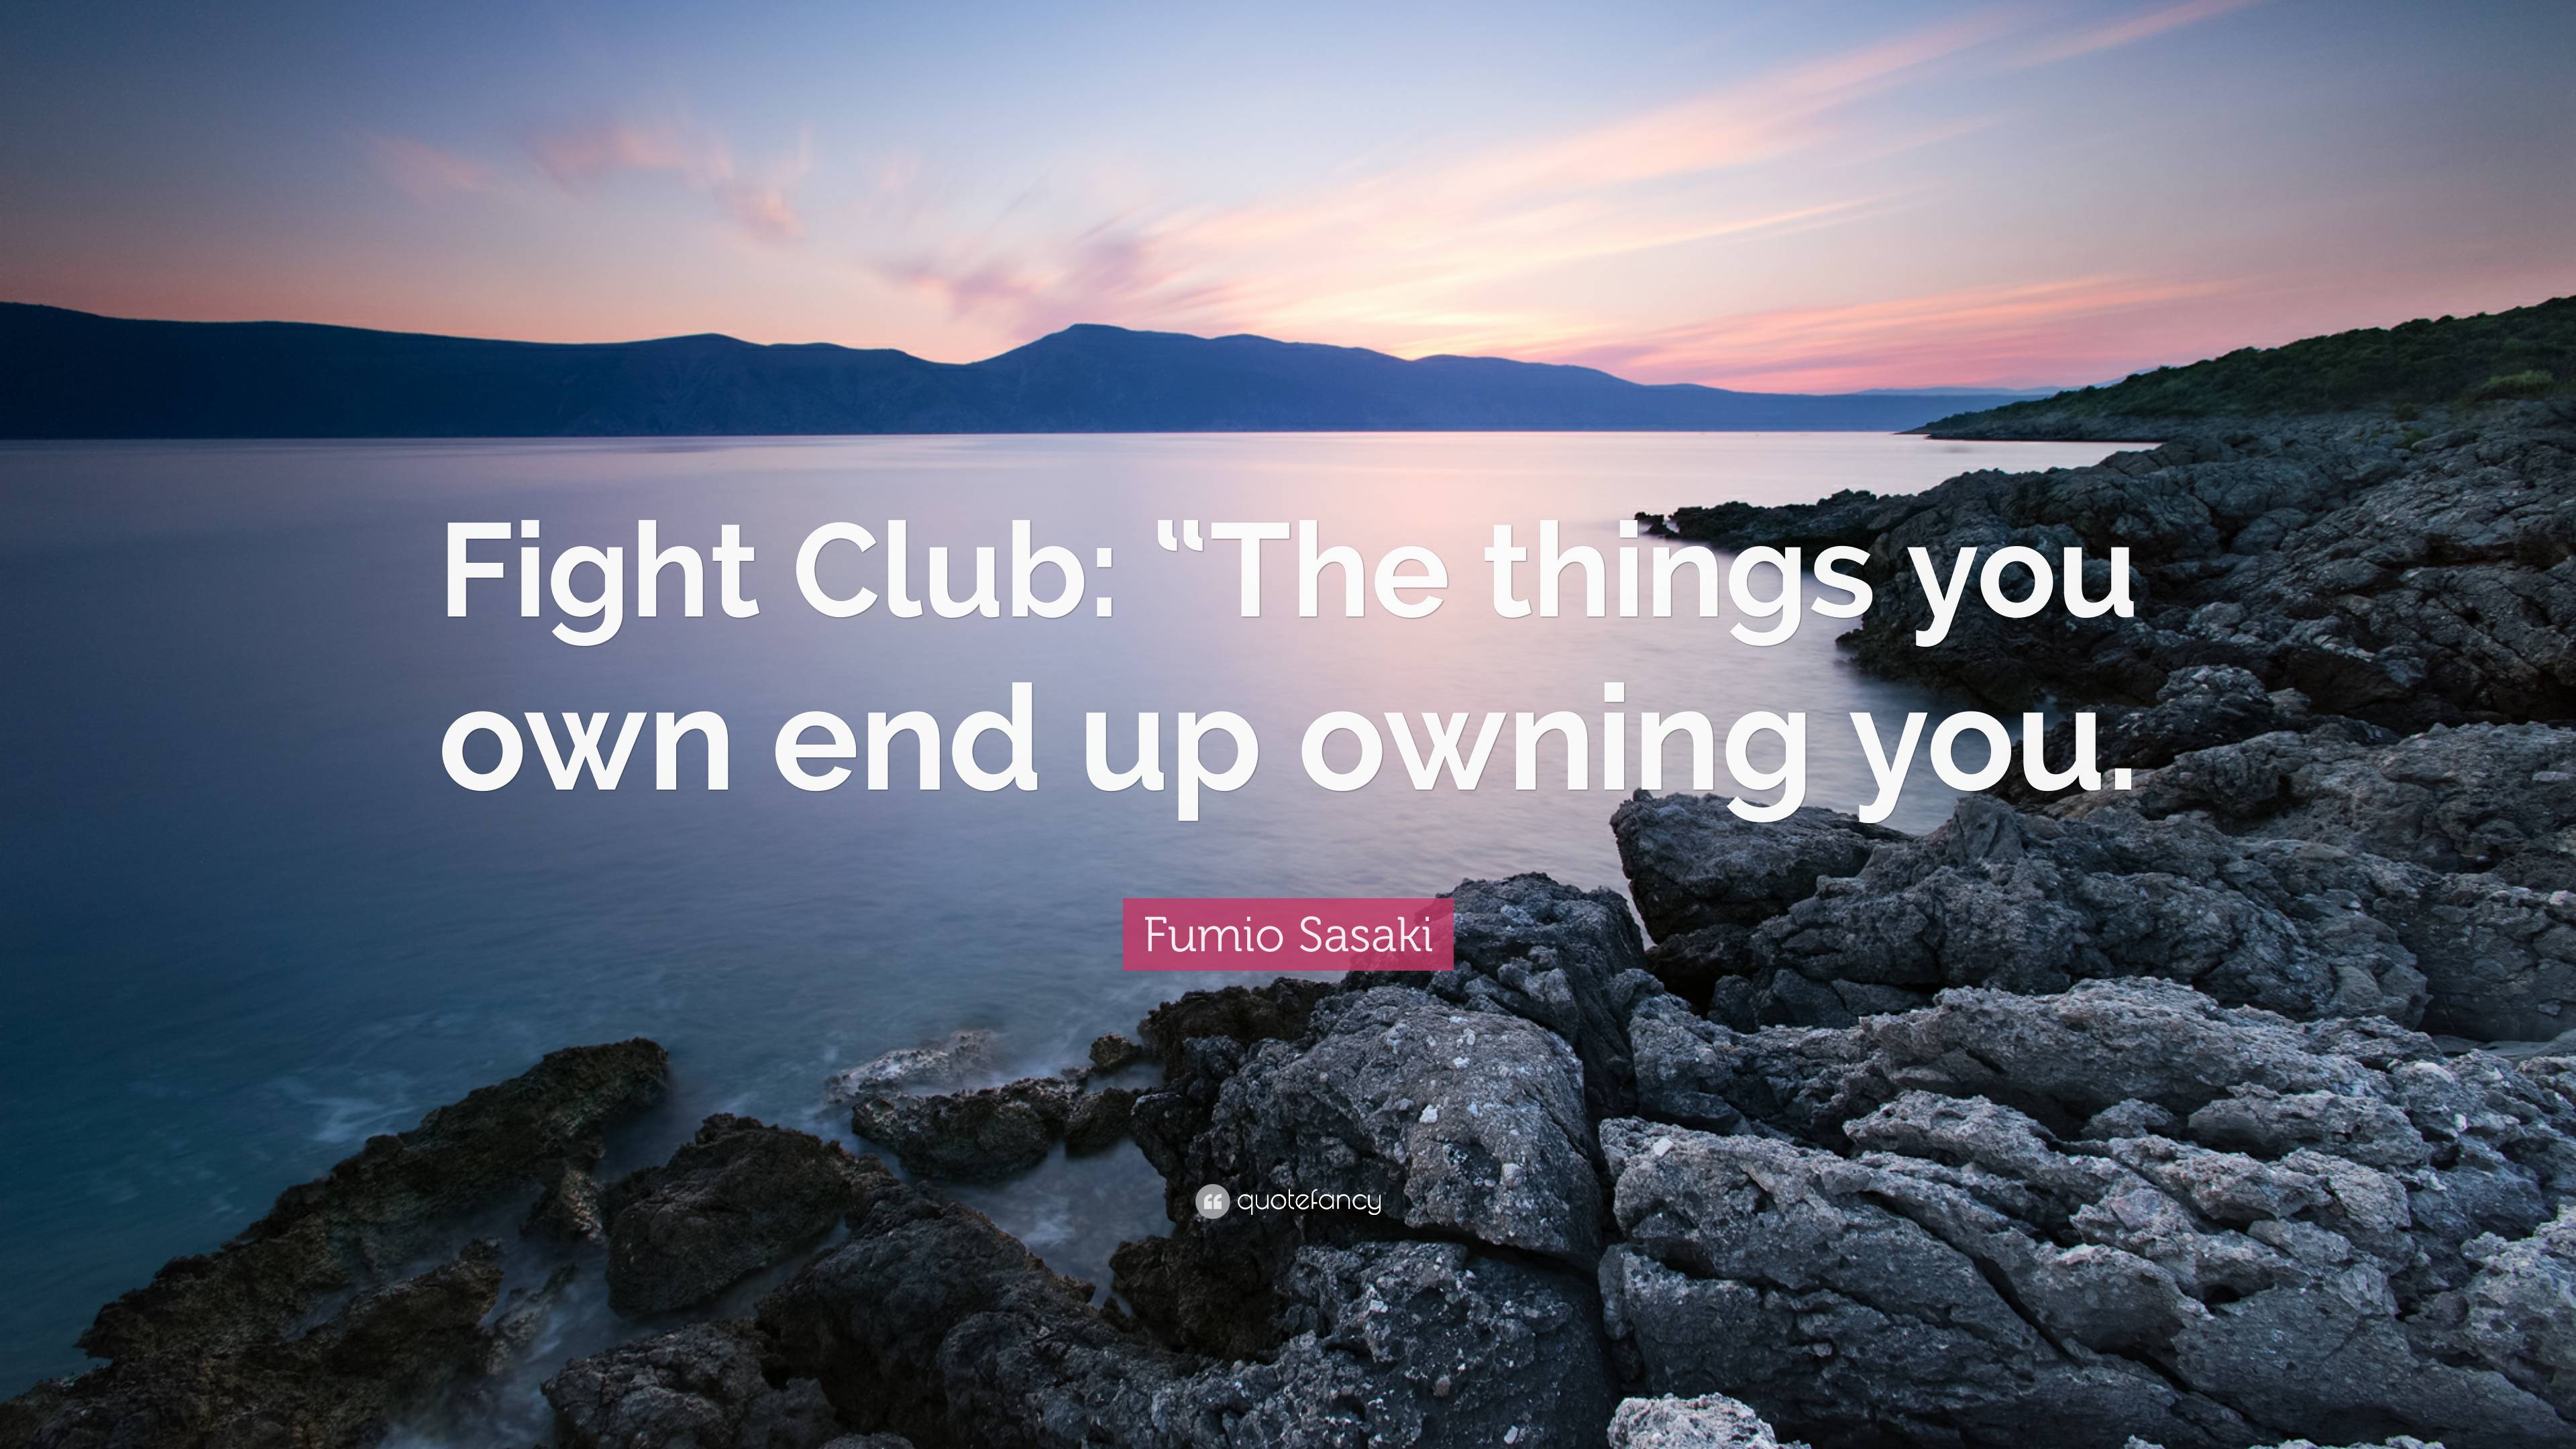 Fumio Sasaki Quote: “Fight Club: “The things you own end up owning you.”